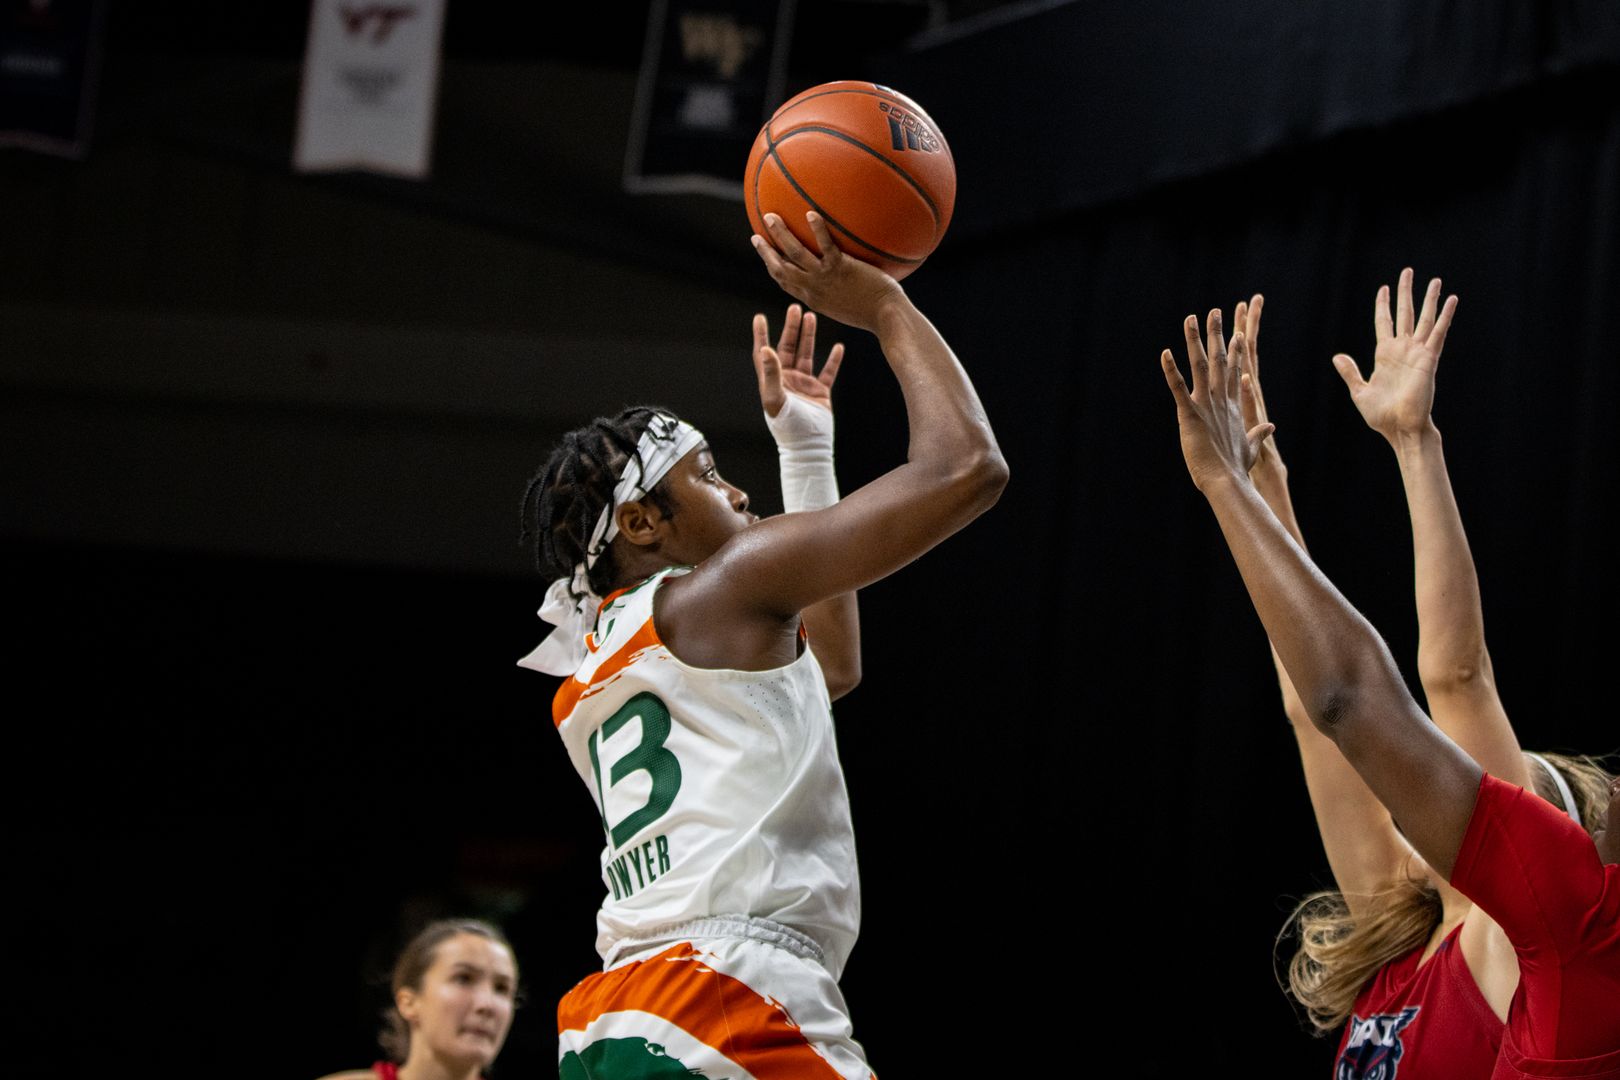 Canes Fly Past Owls, 56-46